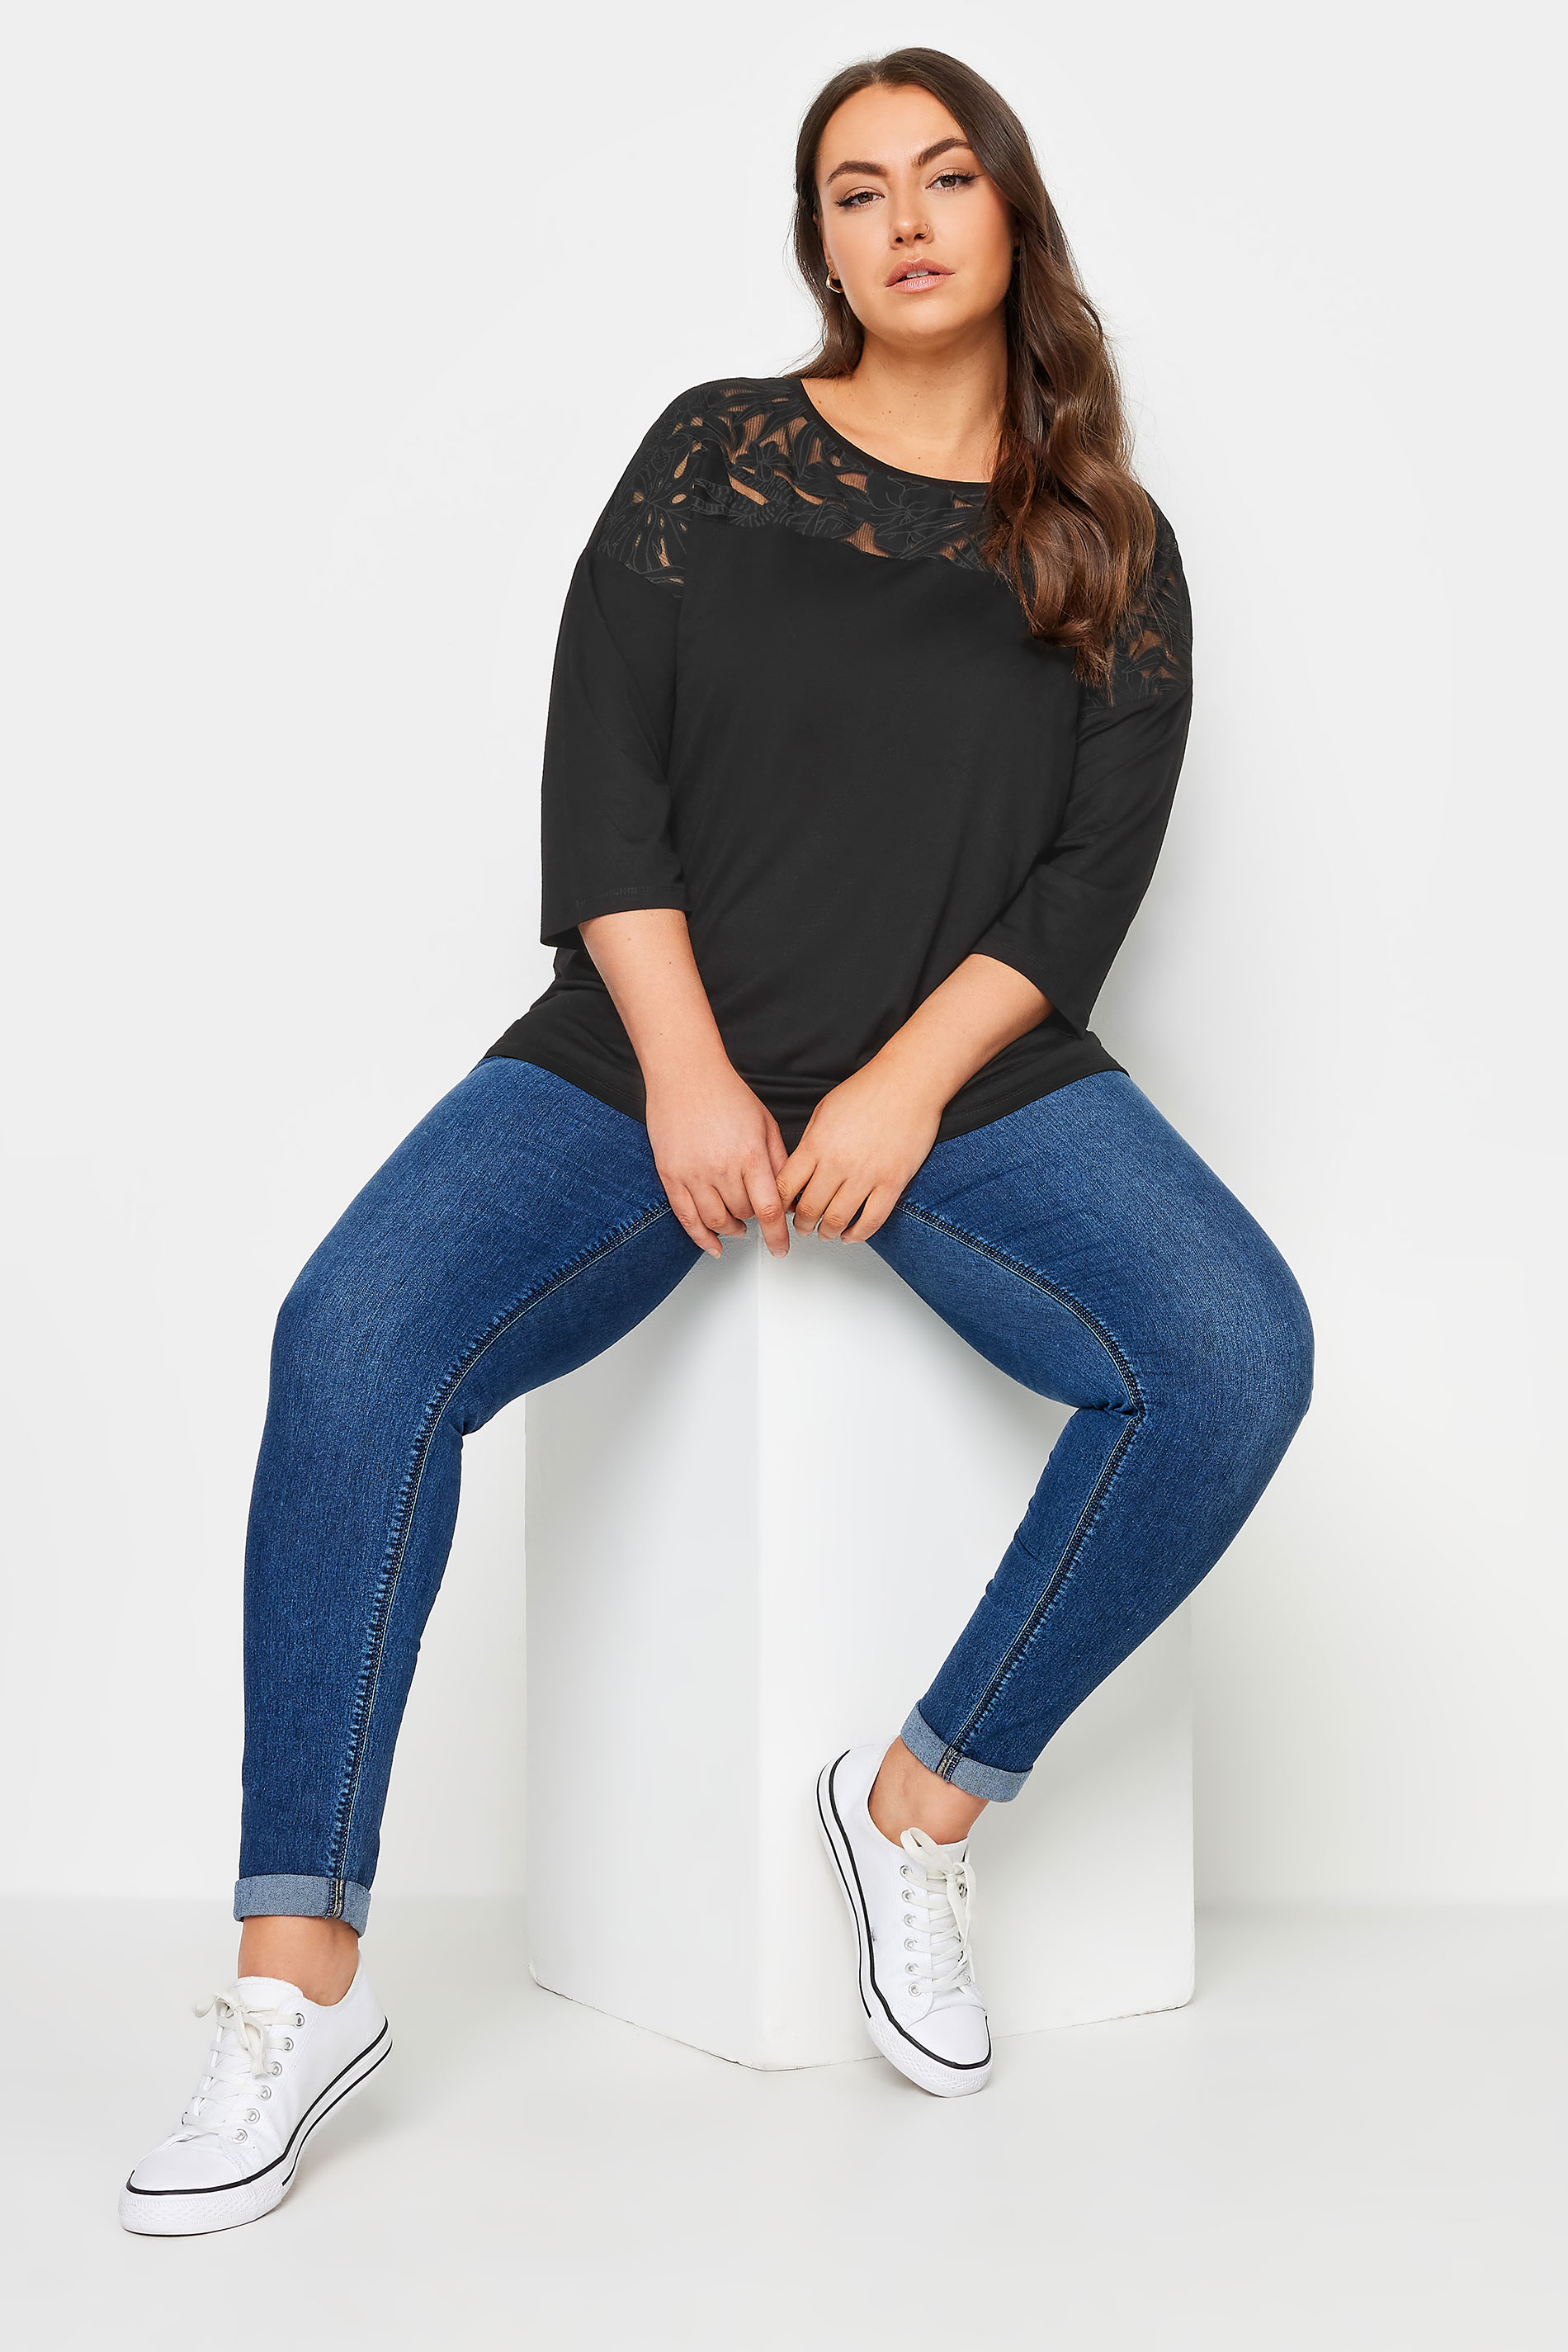 YOURS Plus Size Black Floral Mesh Detail Top | Yours Clothing 2